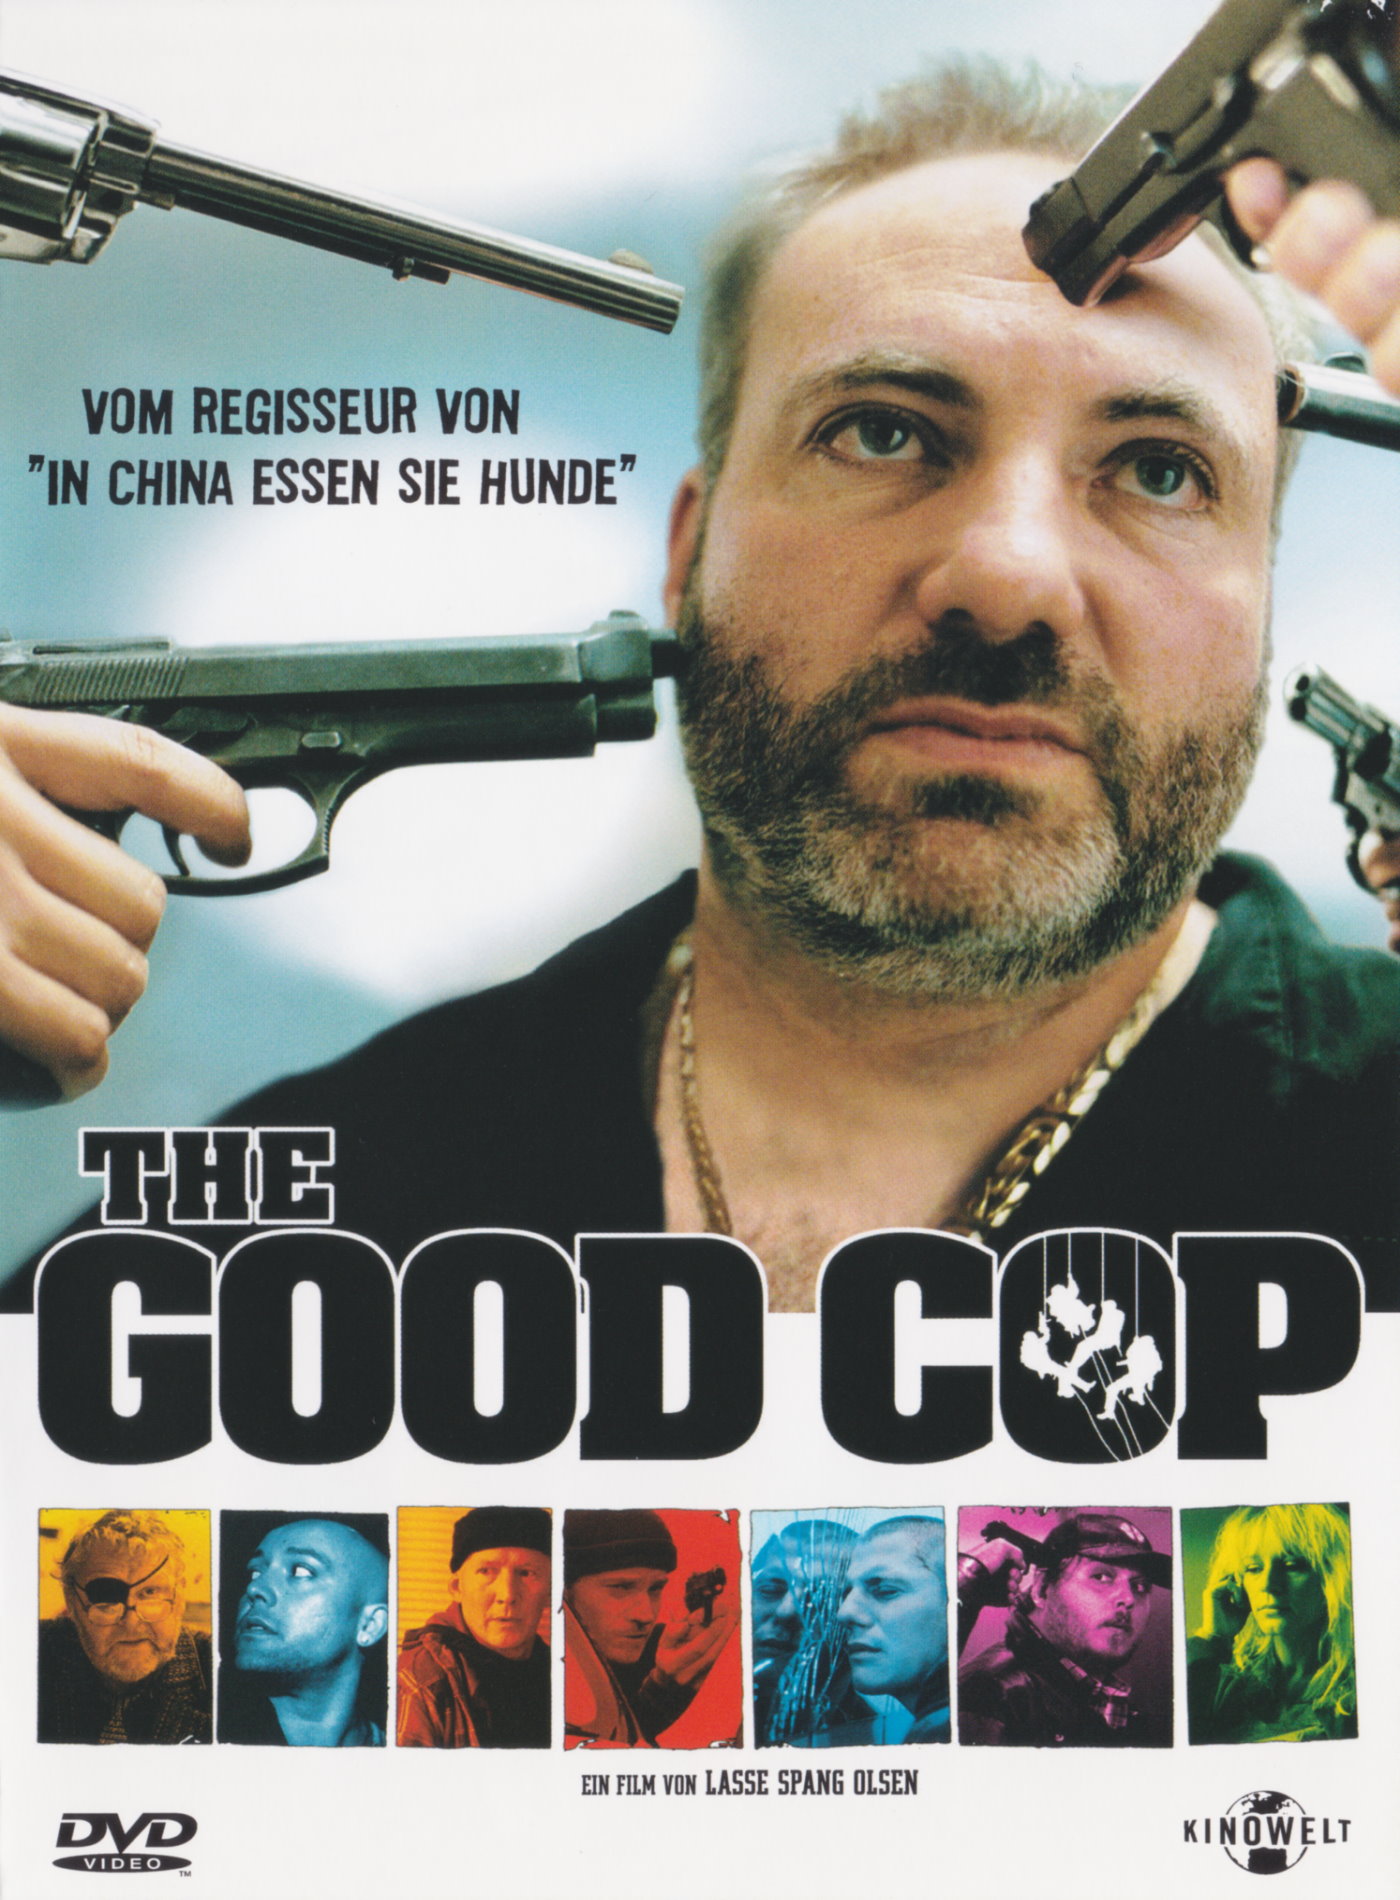 Cover - The Good Cop.jpg